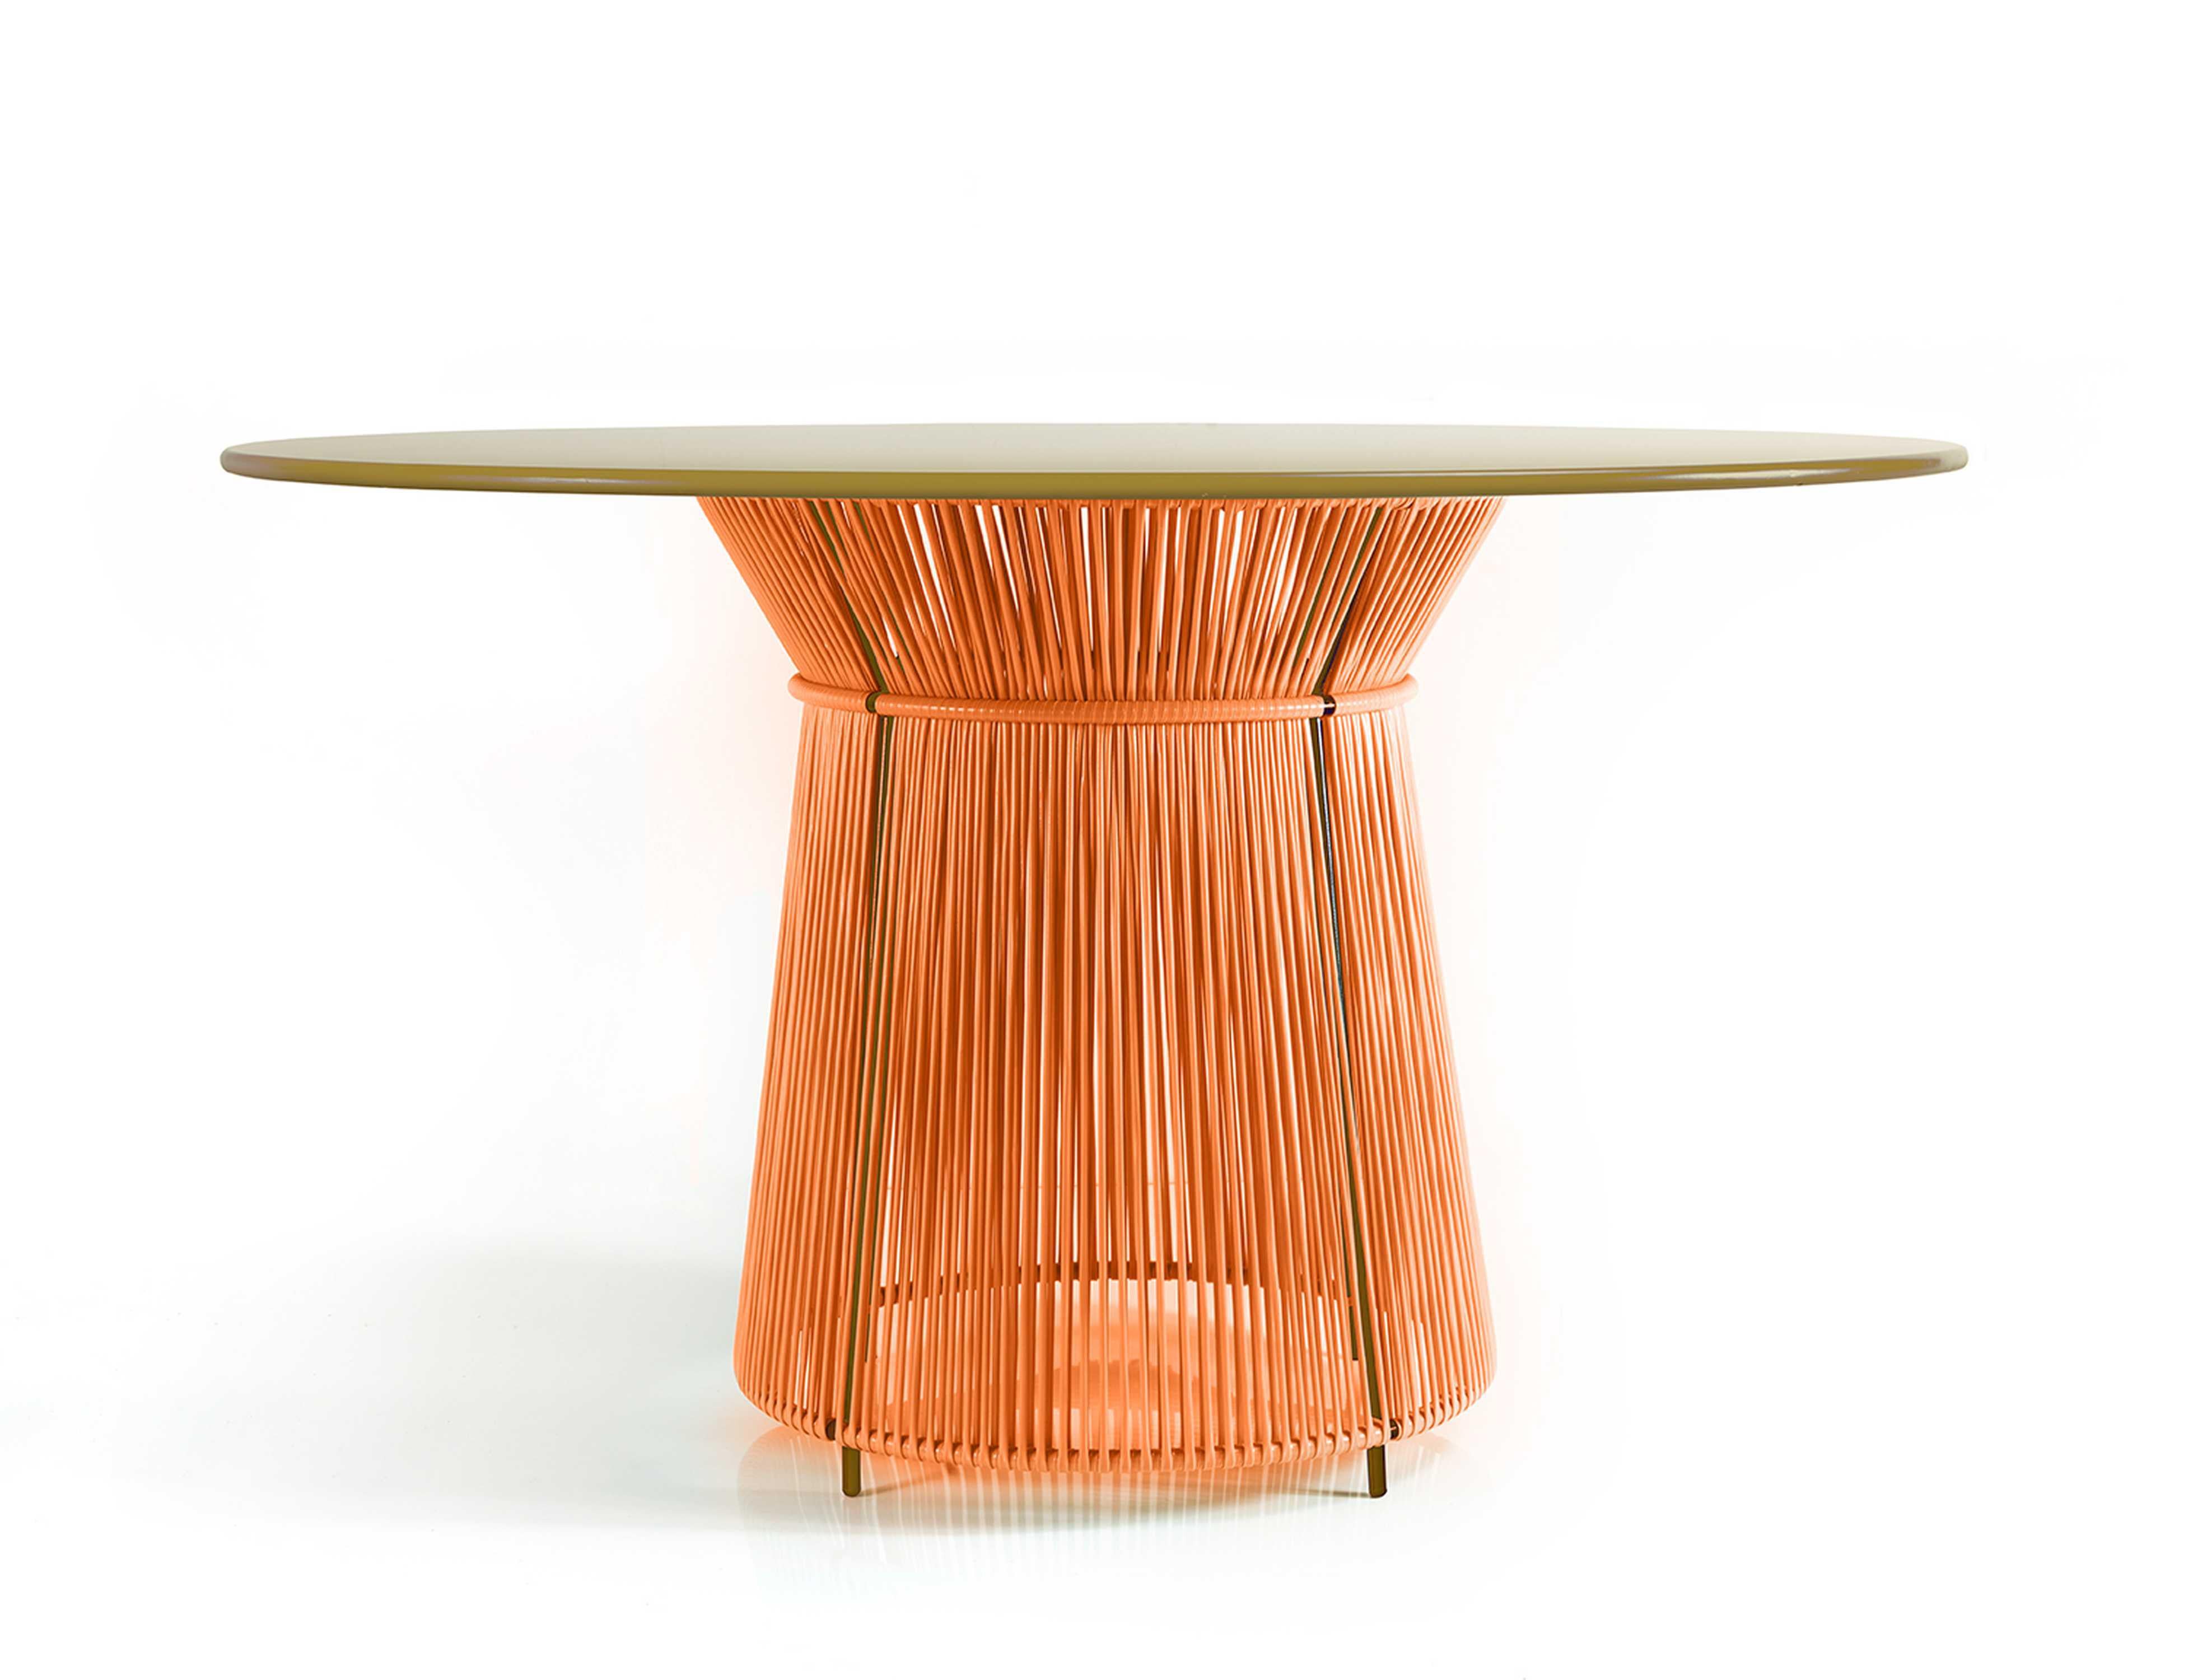 Orange caribe dining table by Sebastian Herkner
Materials: Galvanized and powder-coated tubular steel. PVC strings are made from recycled plastic.
Technique: Made from recycled plastic and weaved by local craftspeople in Colombia. 
Dimensions: